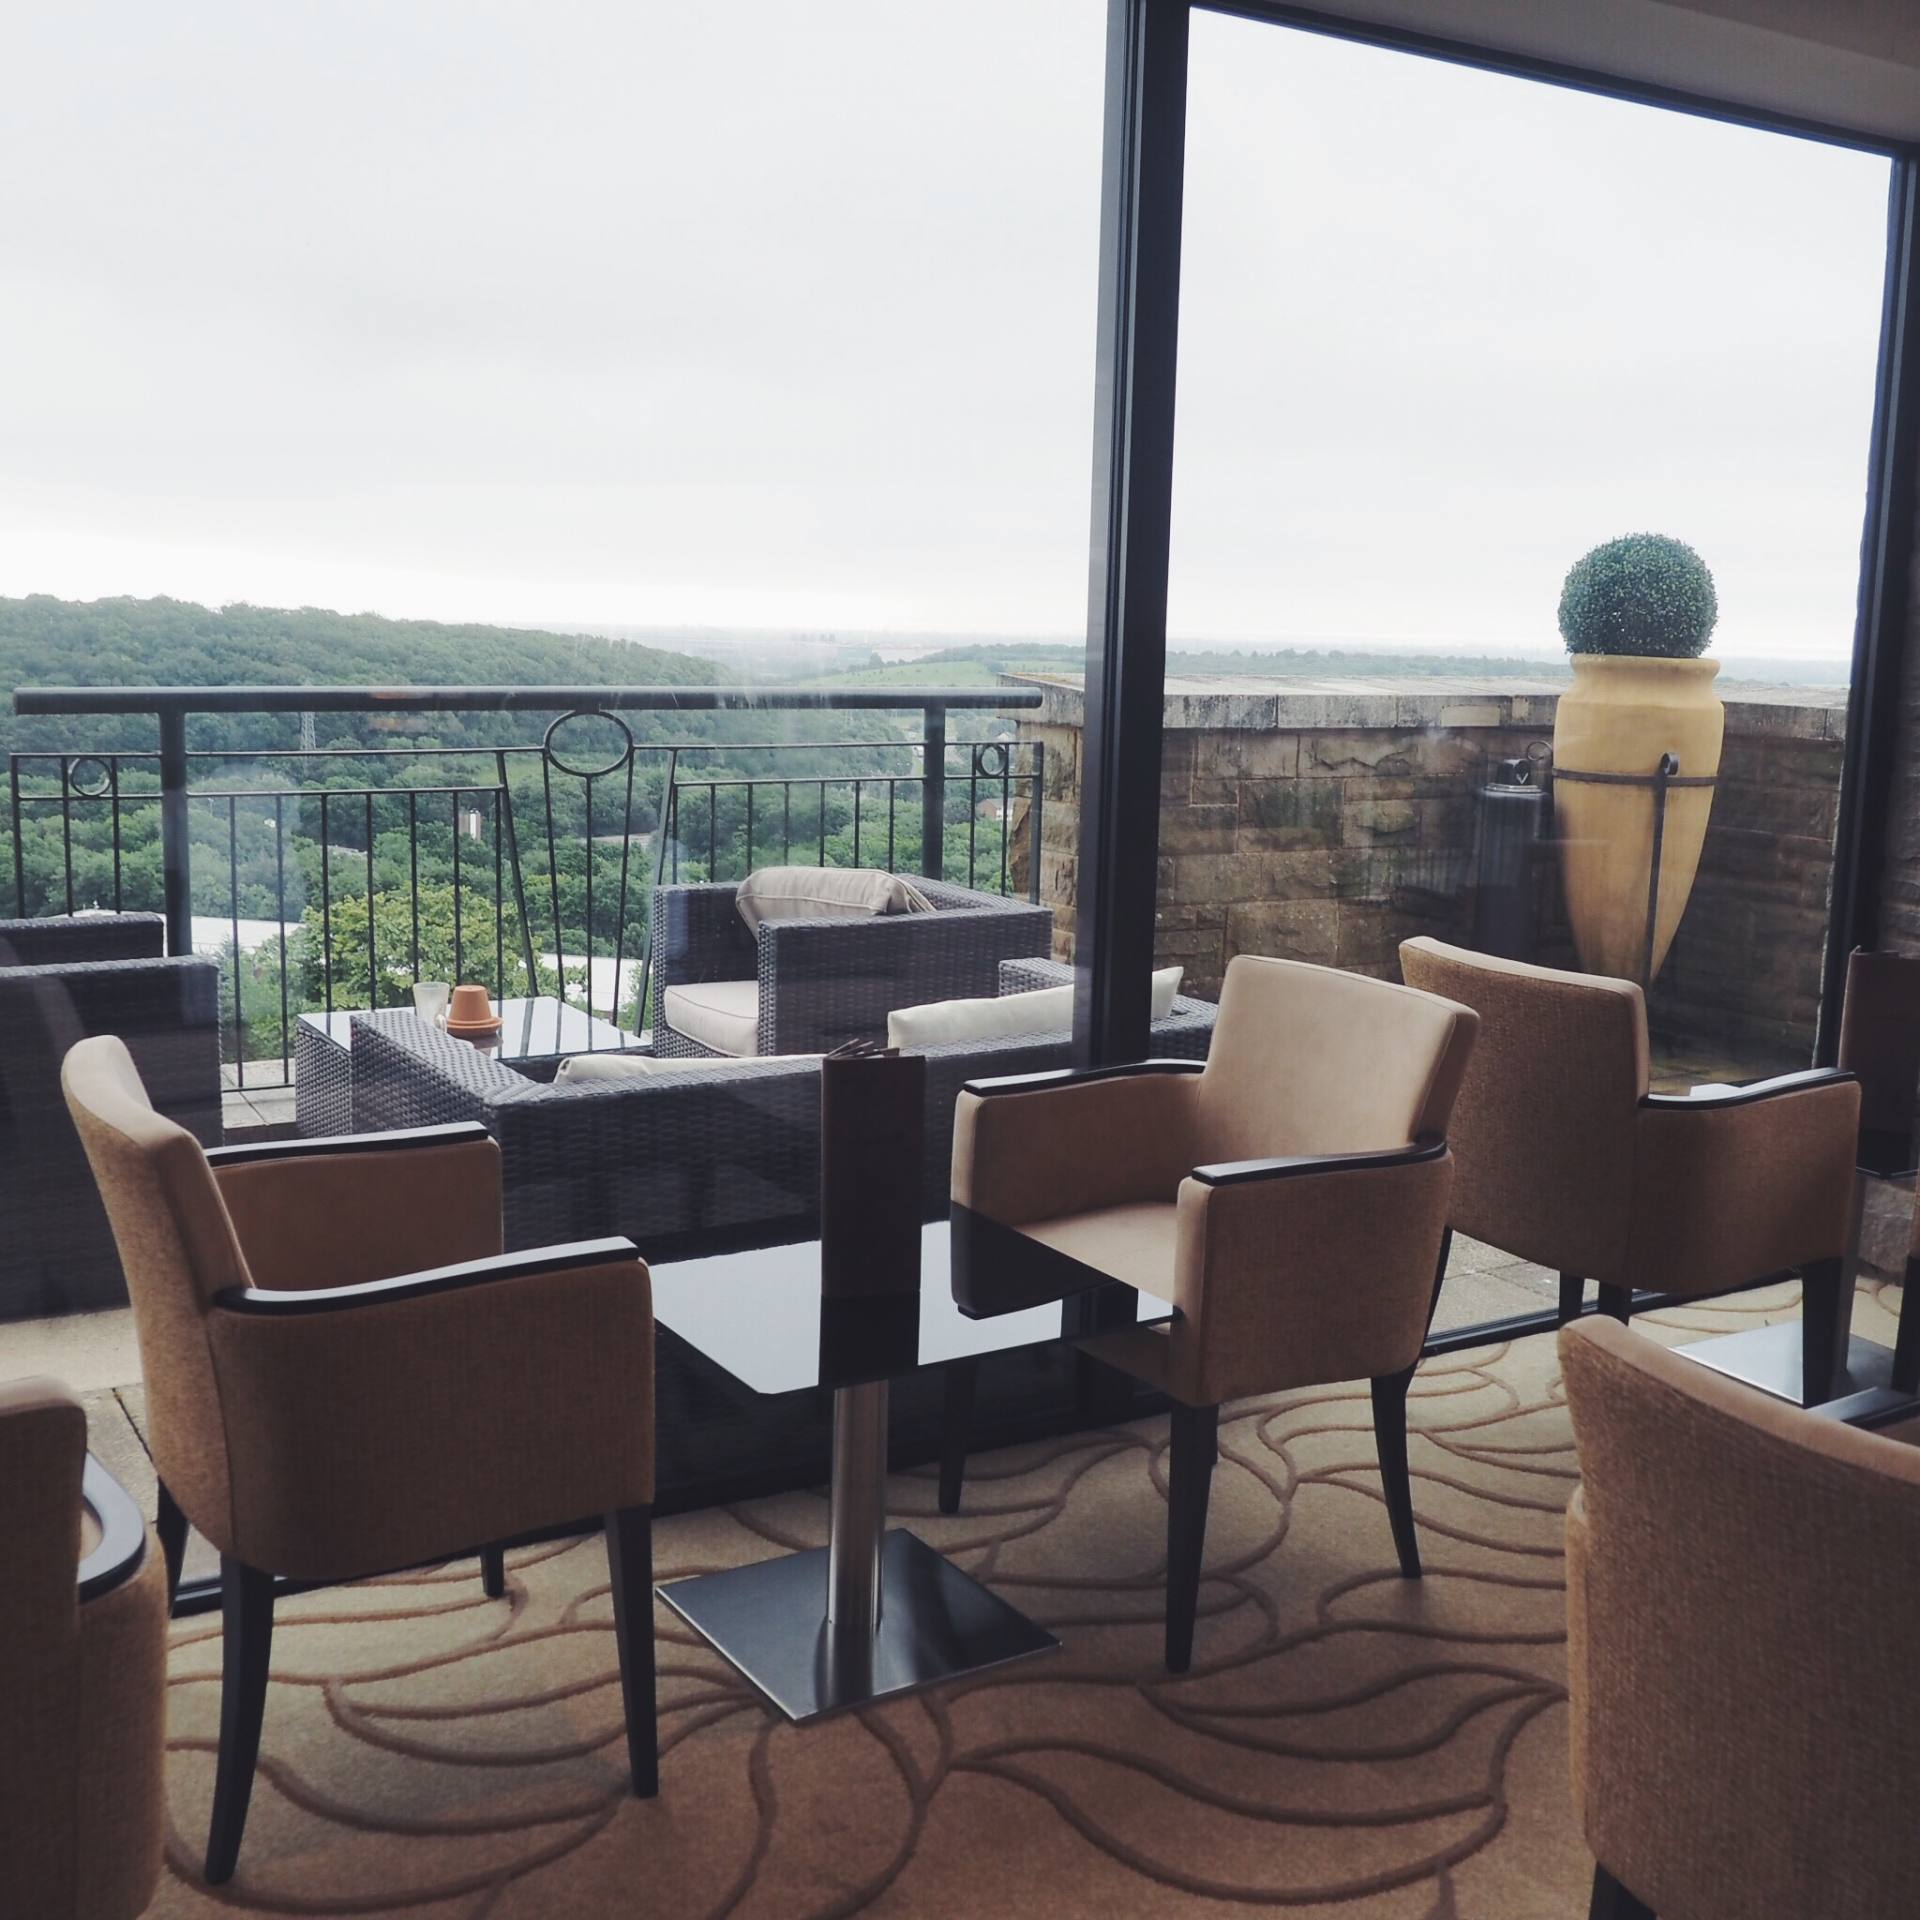 Signature Lounge at the Celtic Manor Resort